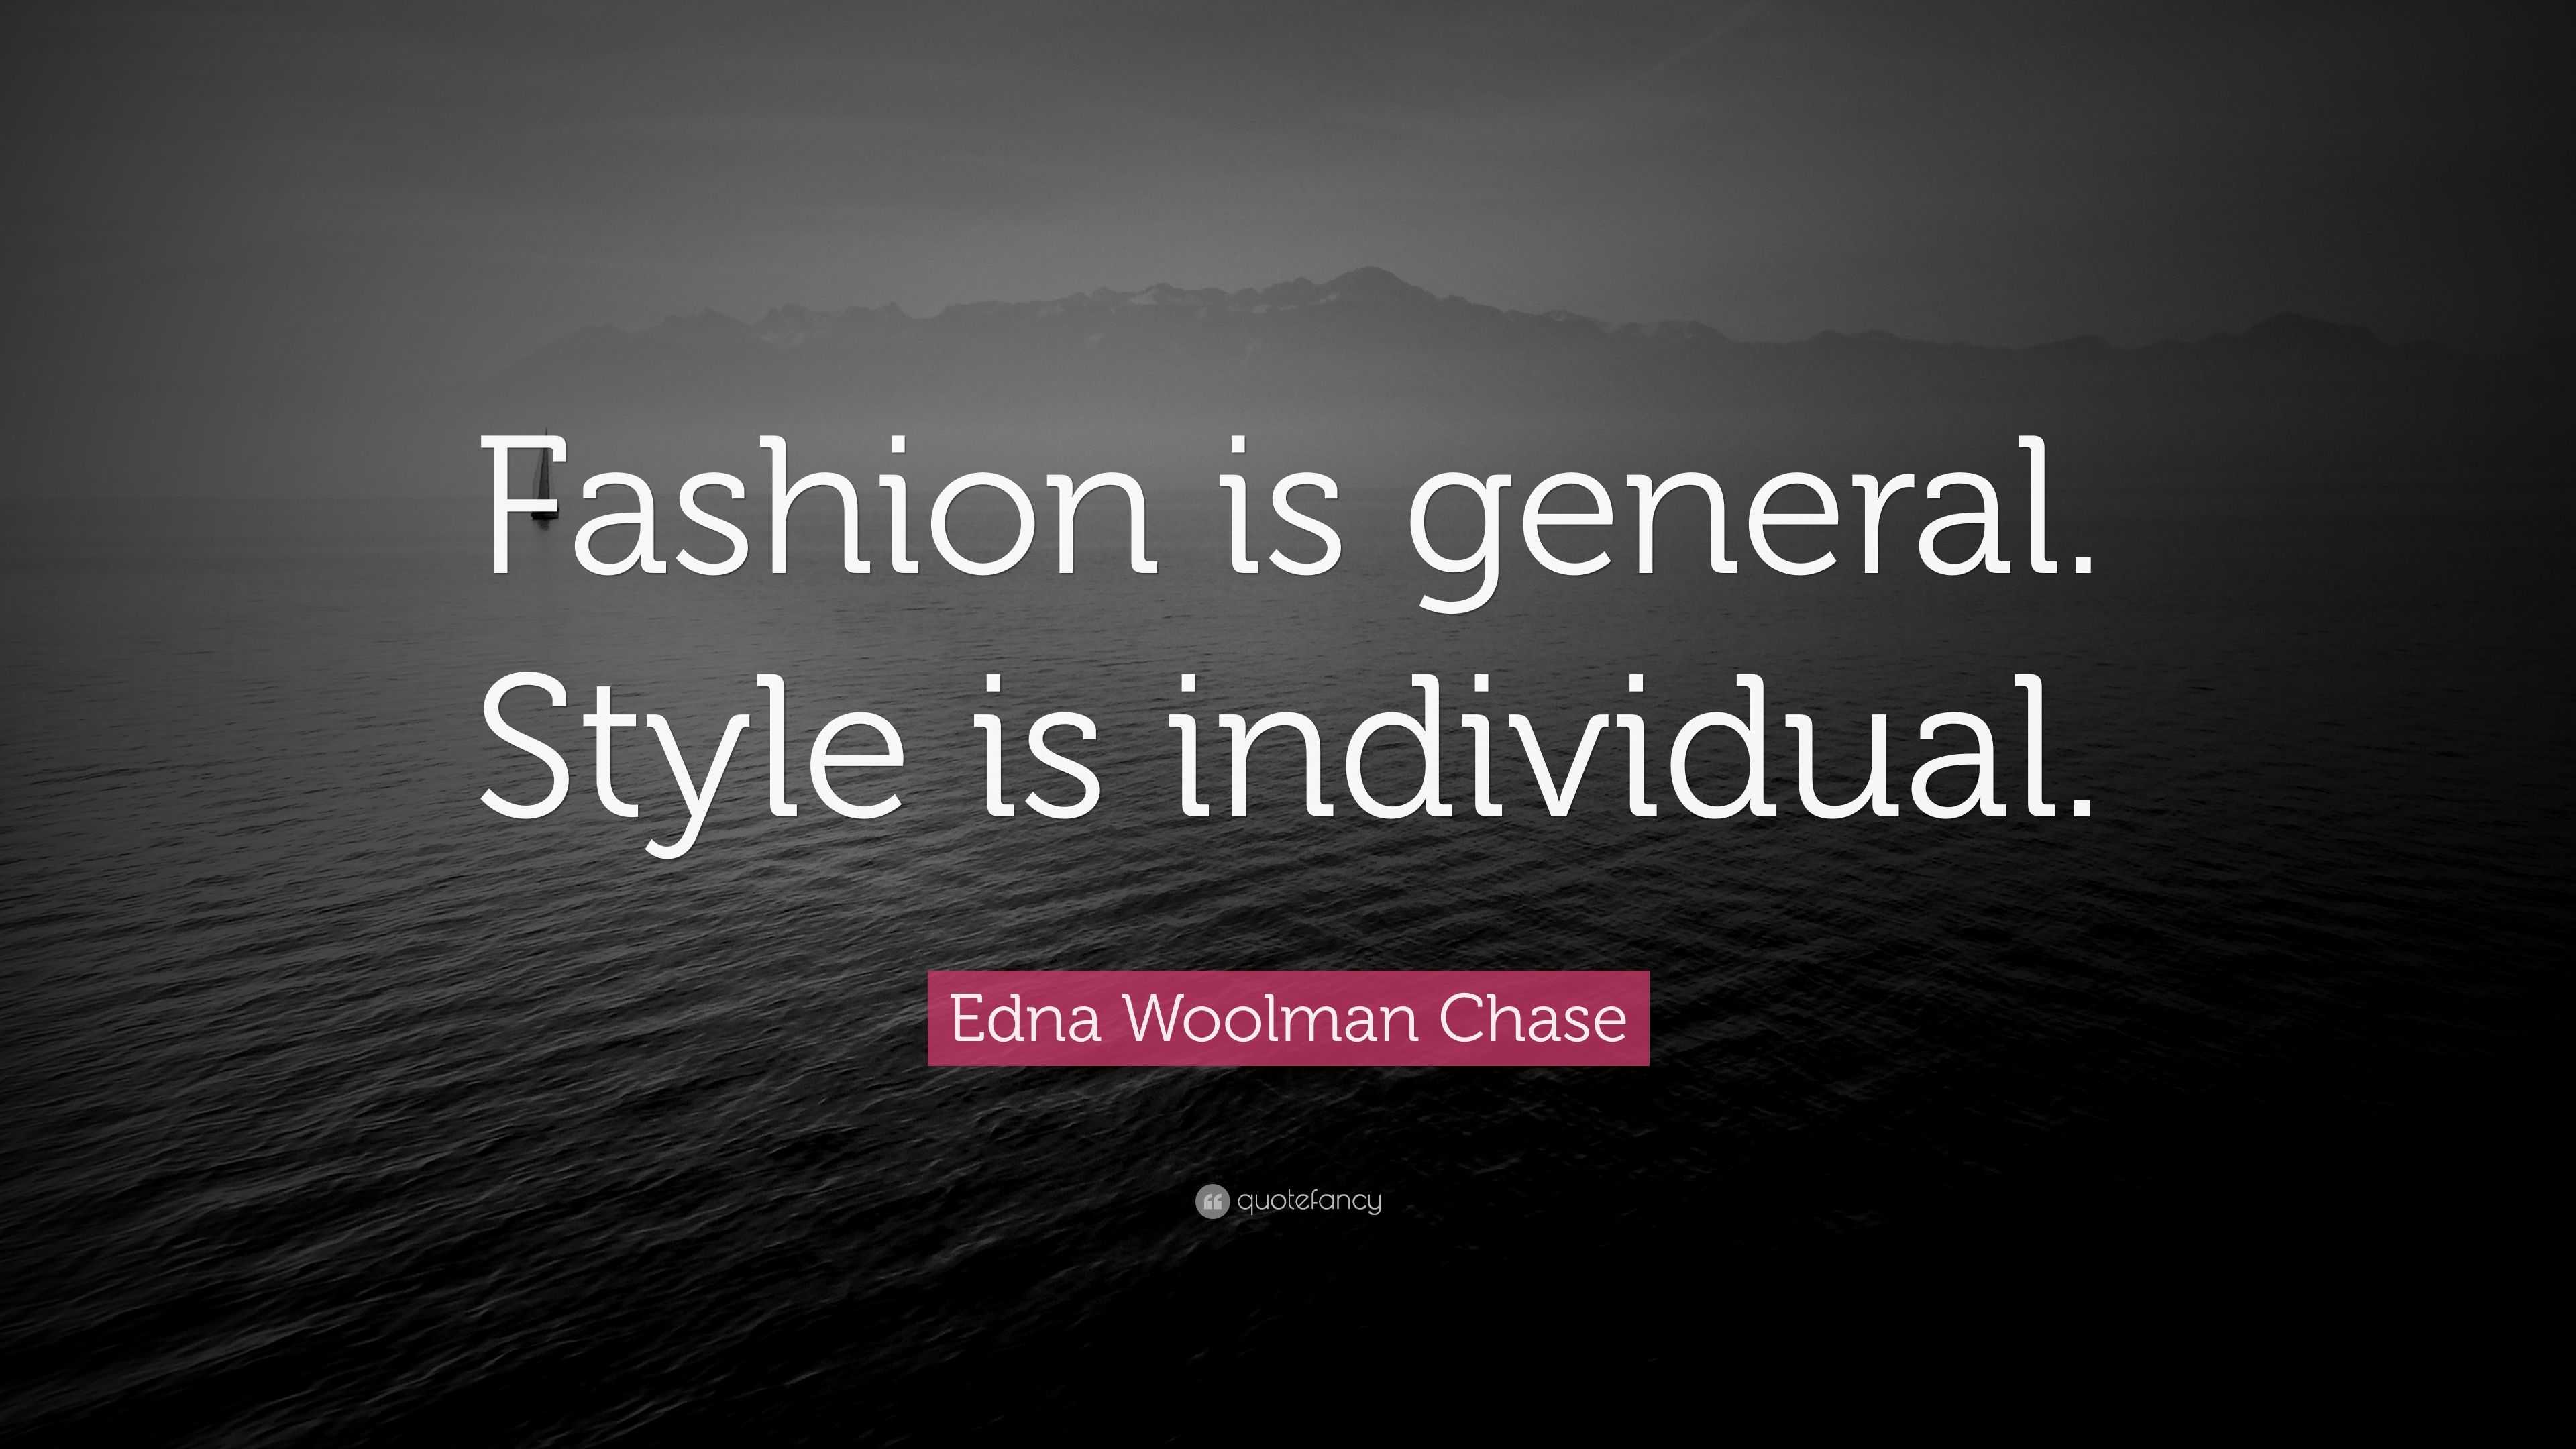 Edna Woolman Chase Quote: “Fashion is general. Style is individual.”